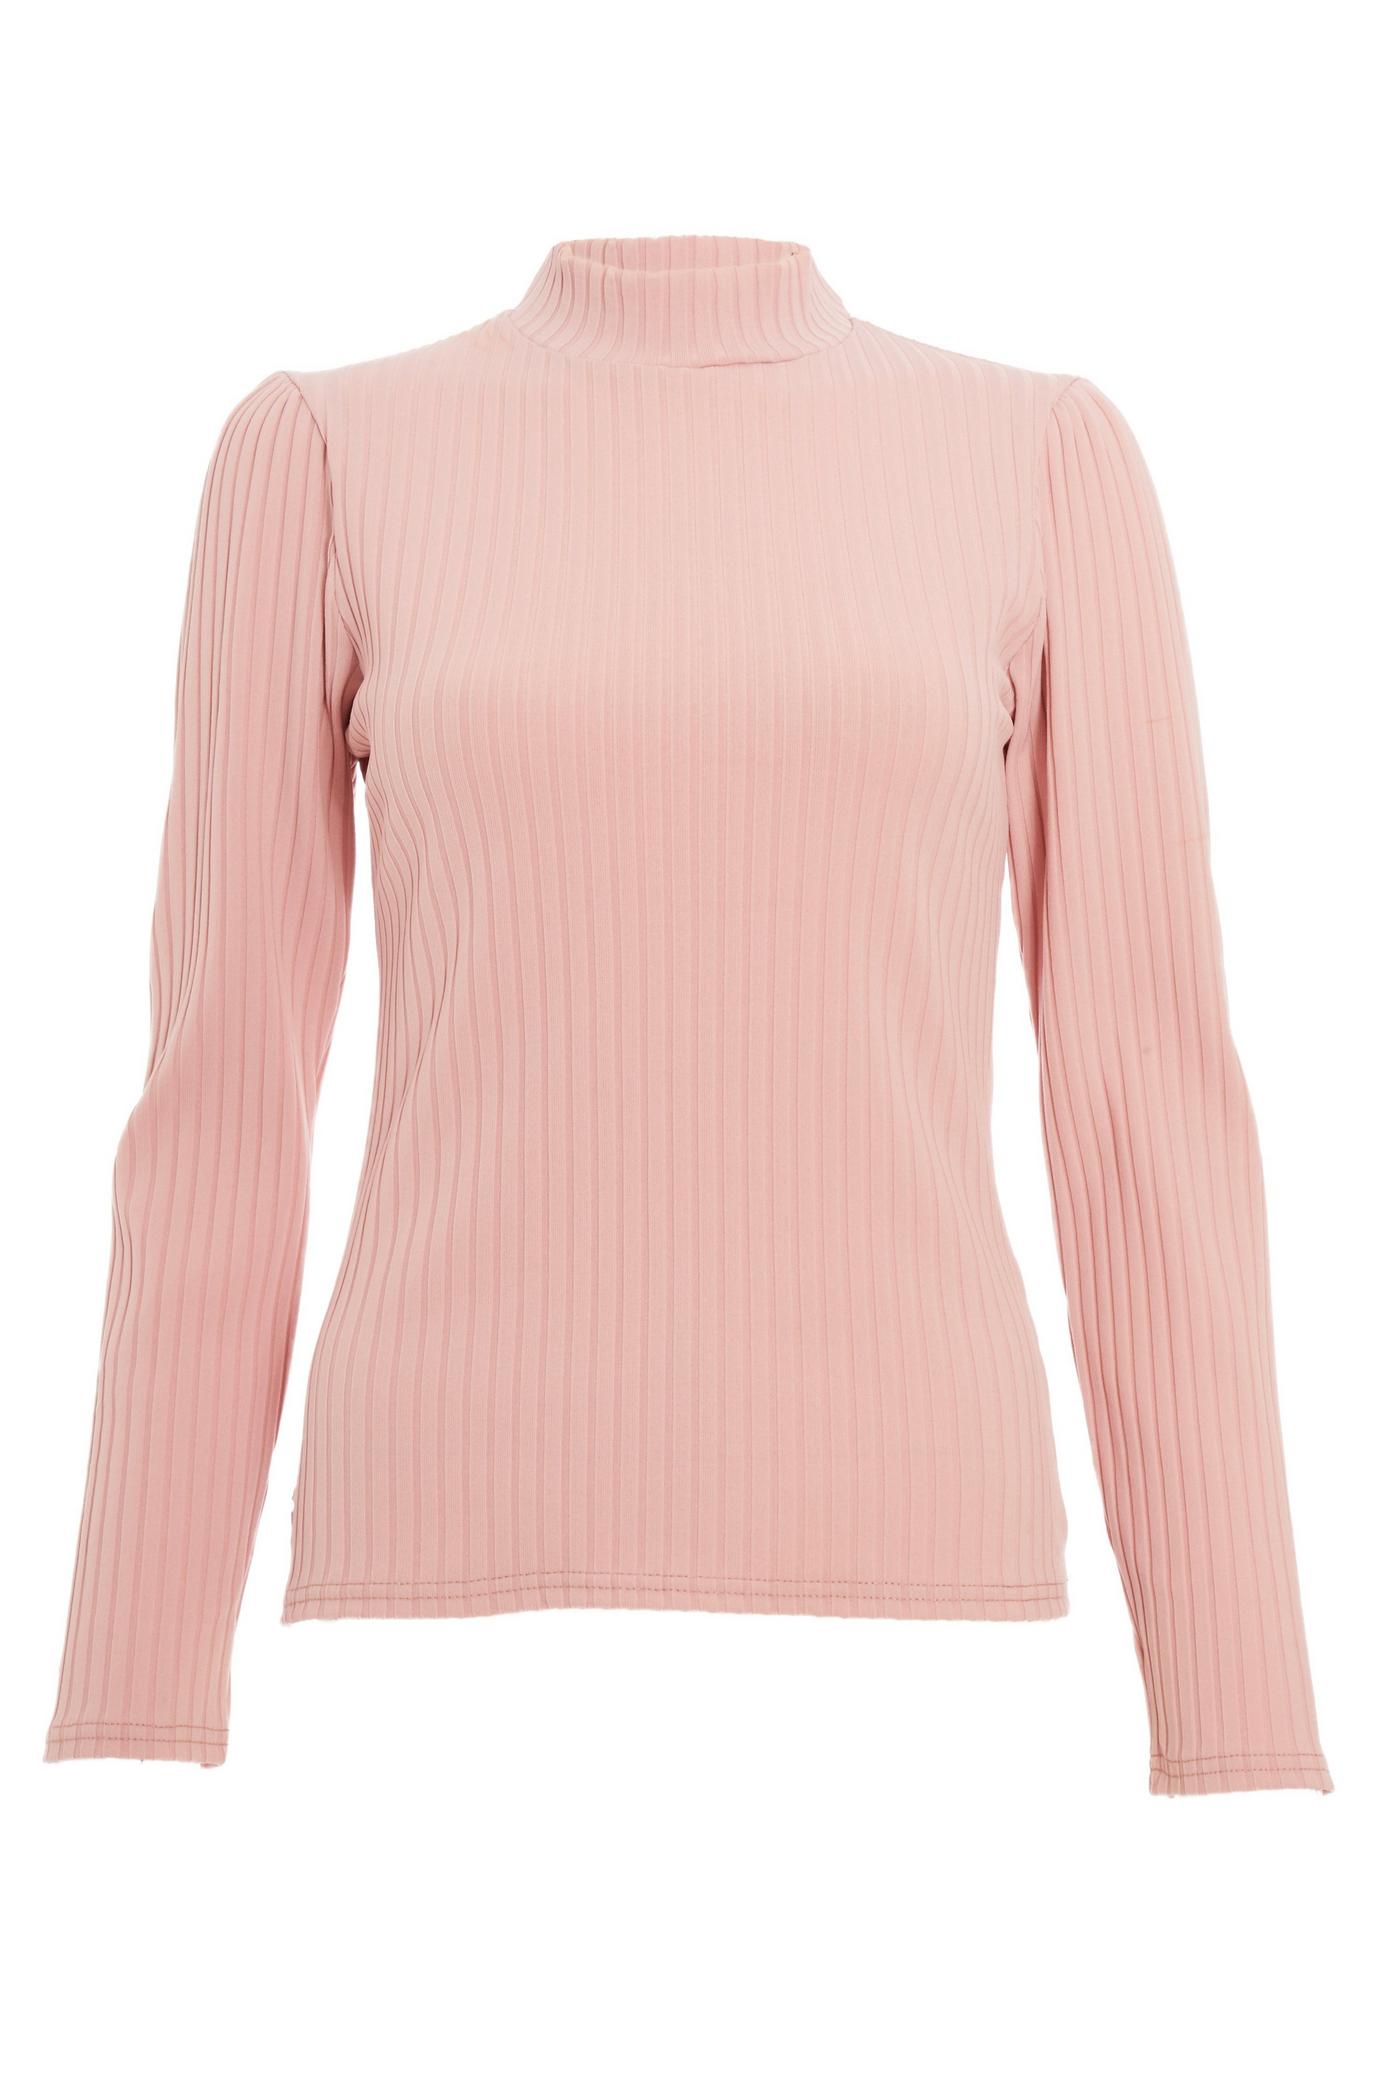 Pink Knit Turtle Neck Top